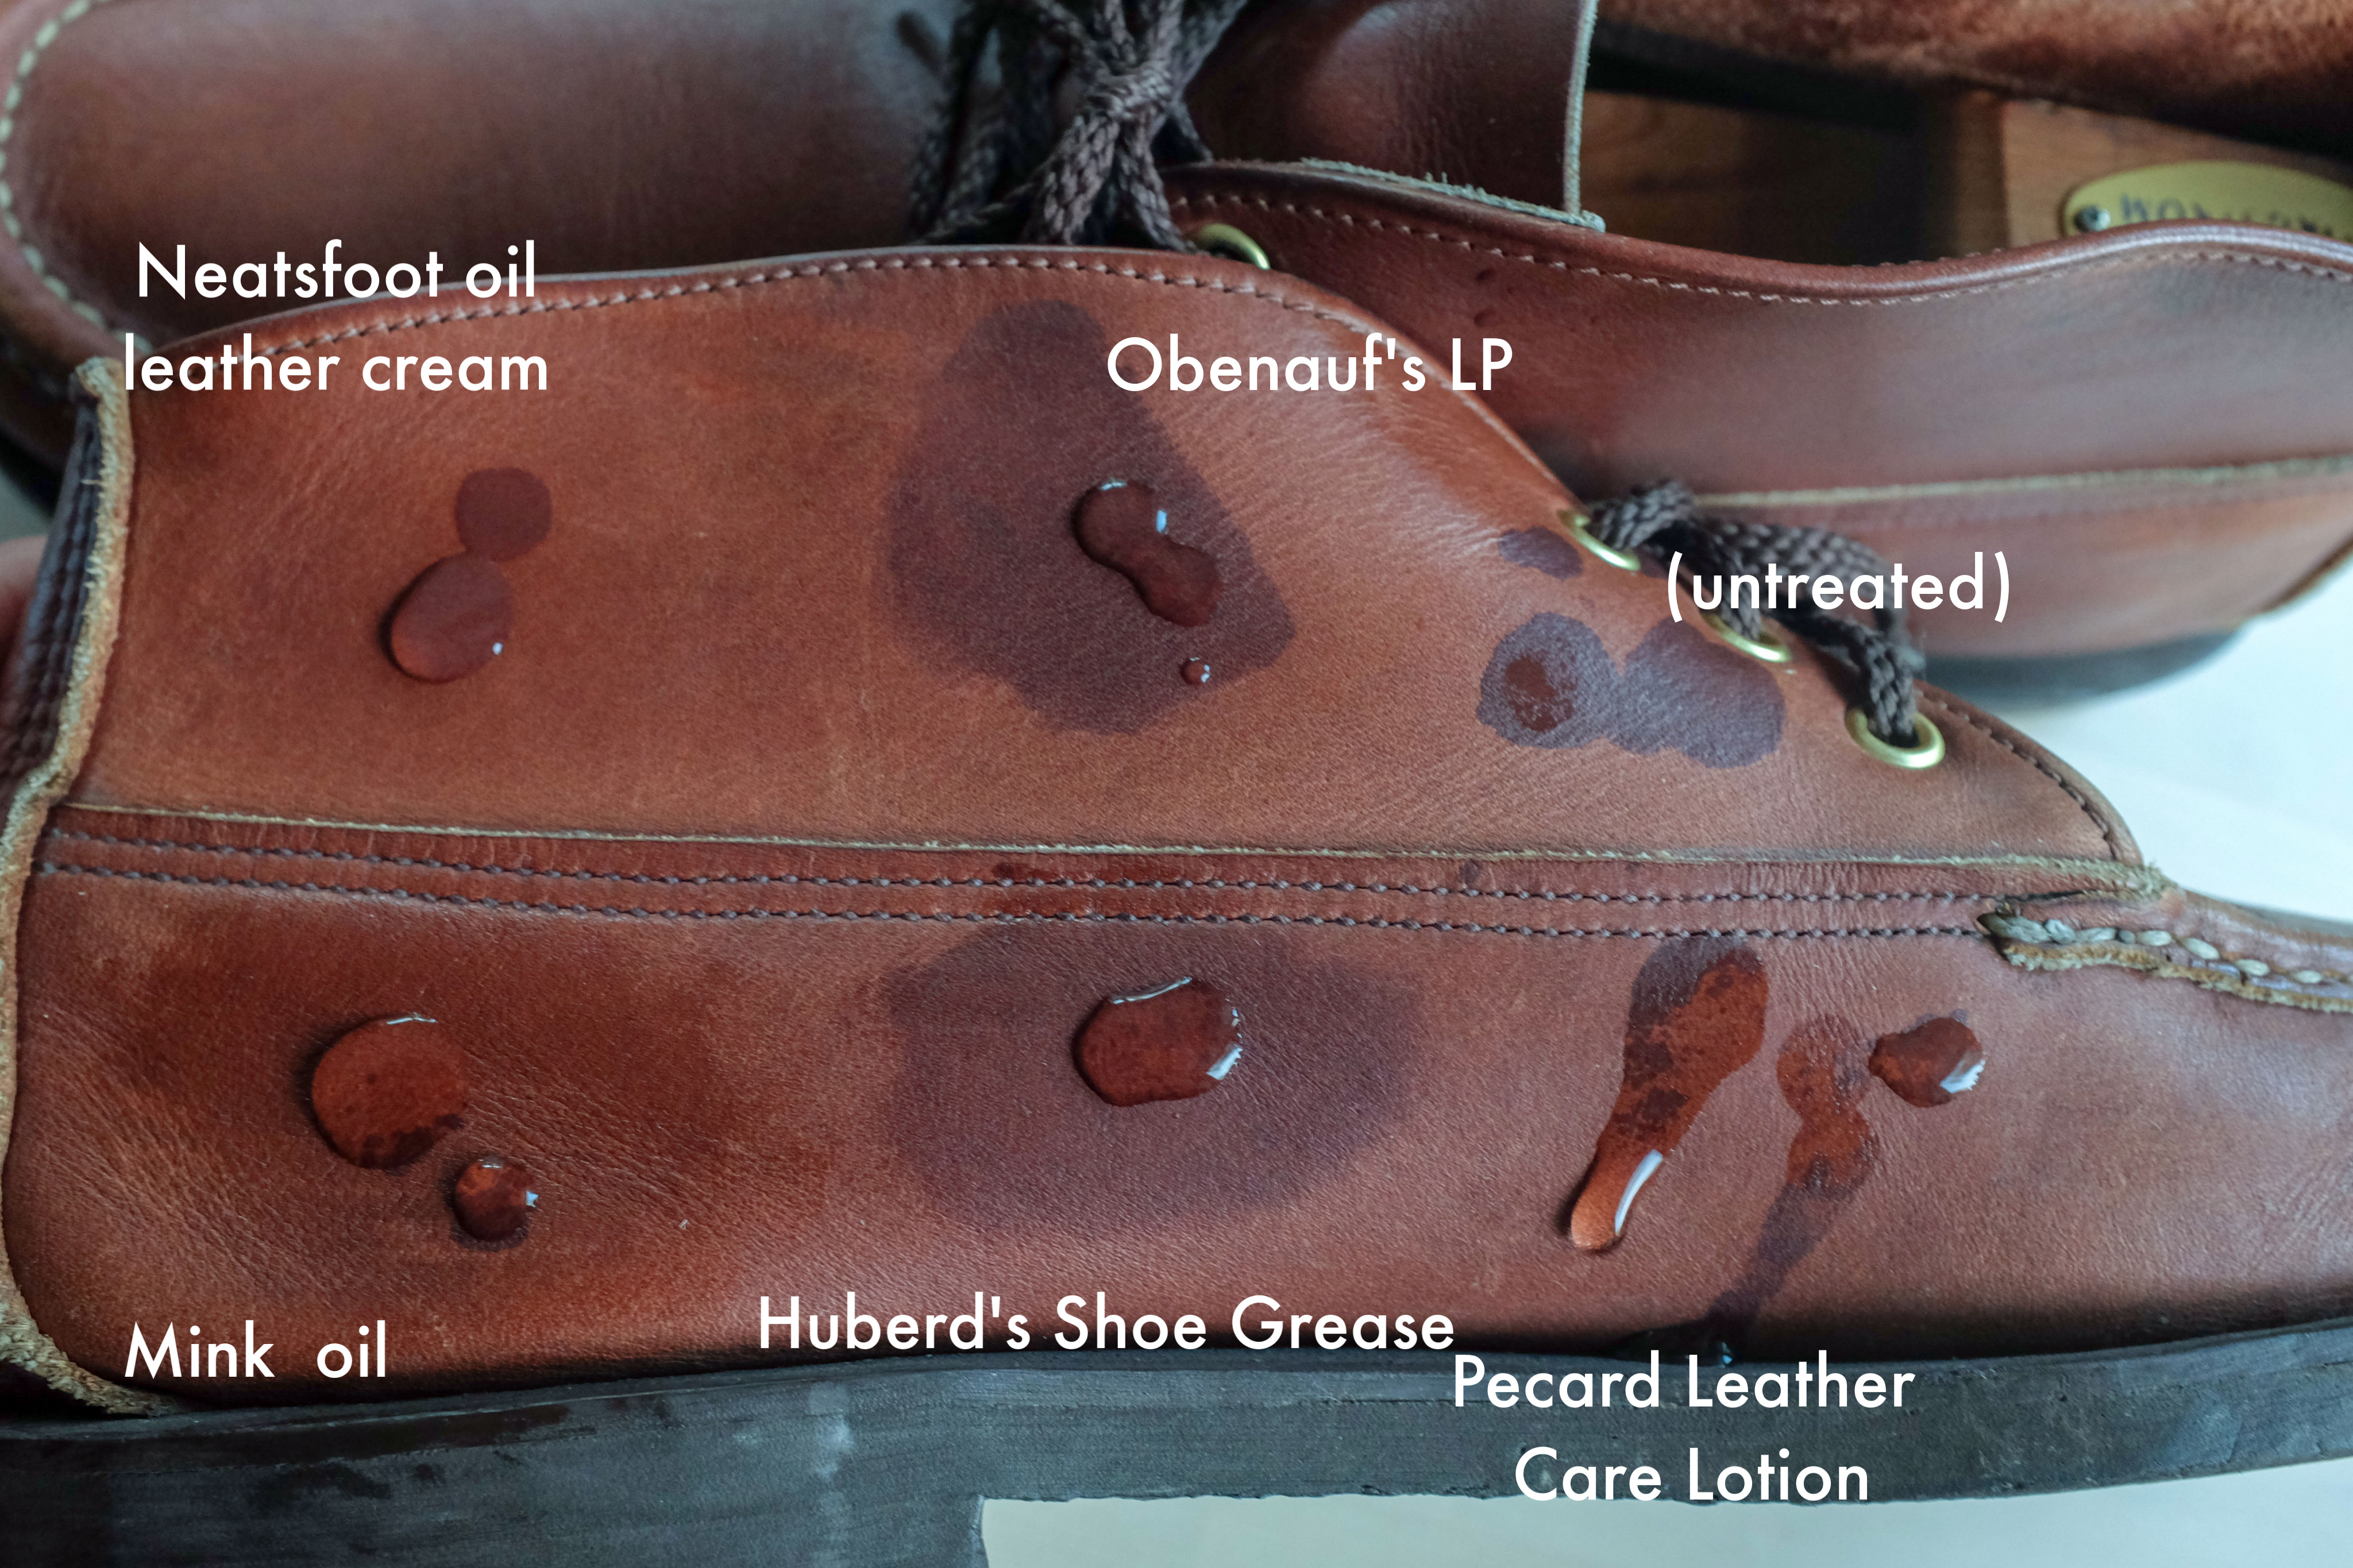 huberd's shoe grease review